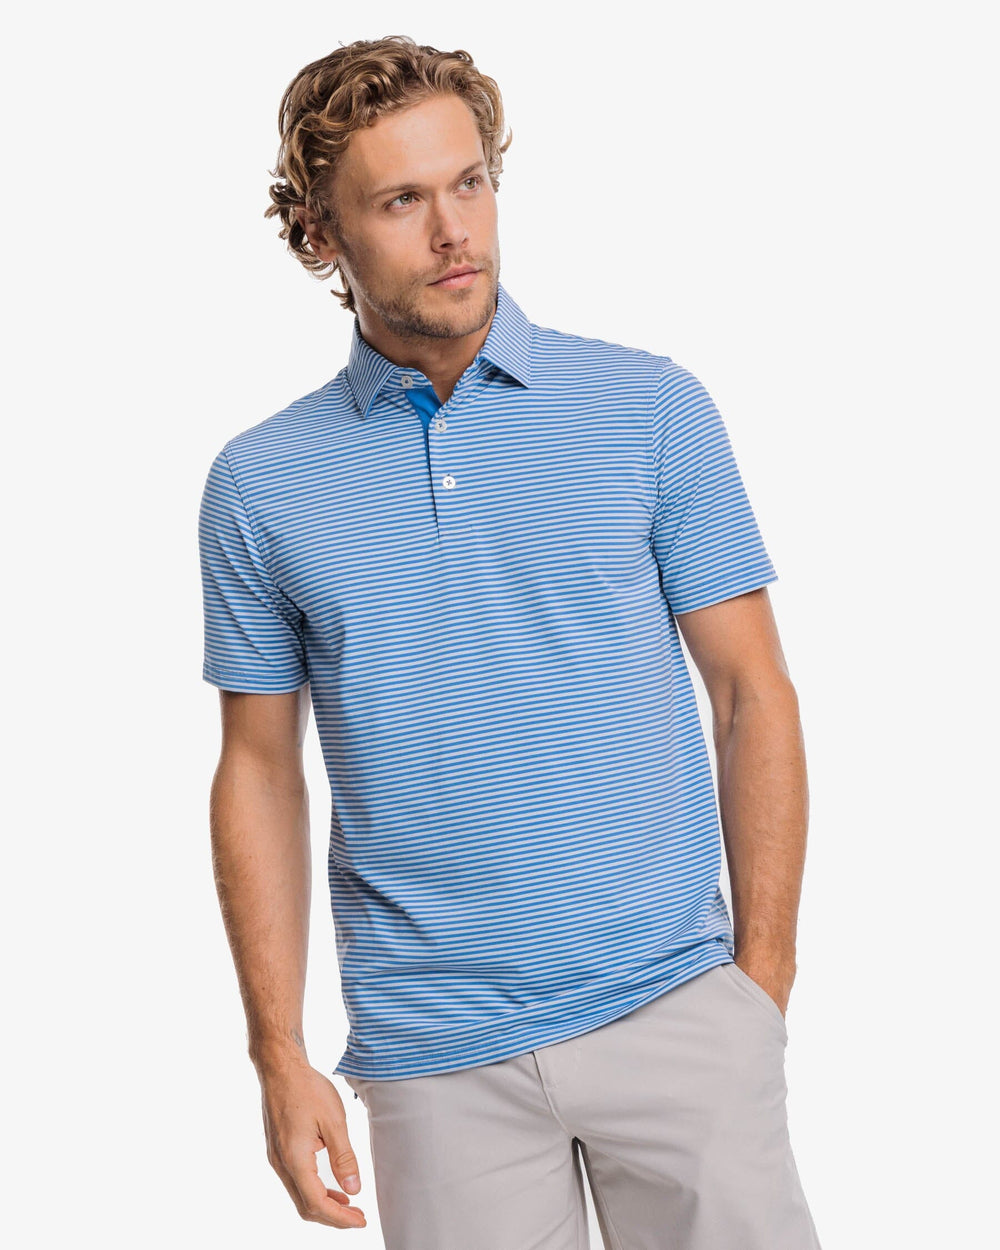 The front view of the Southern Tide Shores Stripe brrr eeze Performance Polo Shirt by Southern Tide - Slate Grey